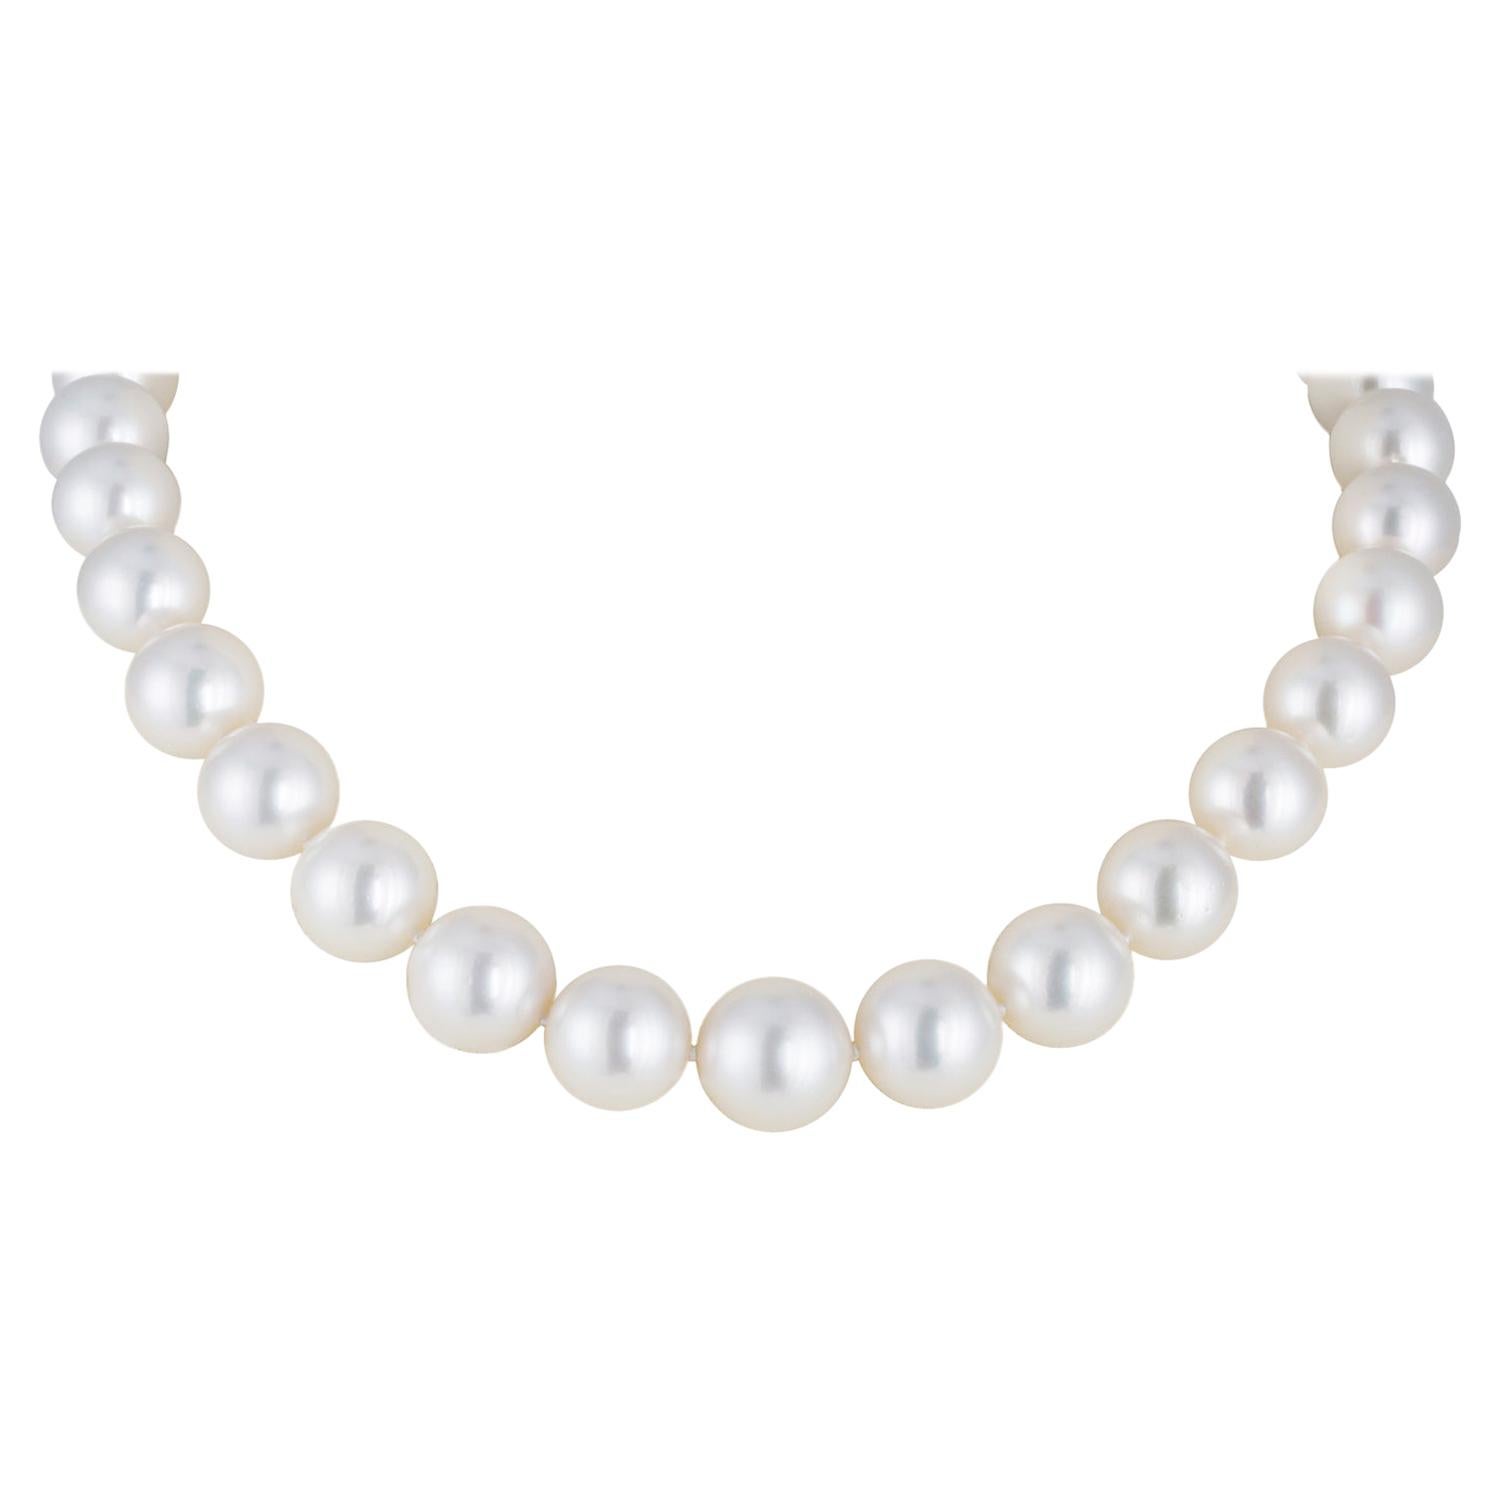 Sold at Auction: 14K White Gold, White Cultured South Sea Pearl and Black  Diamond, Chanel Inspired Strand Necklace